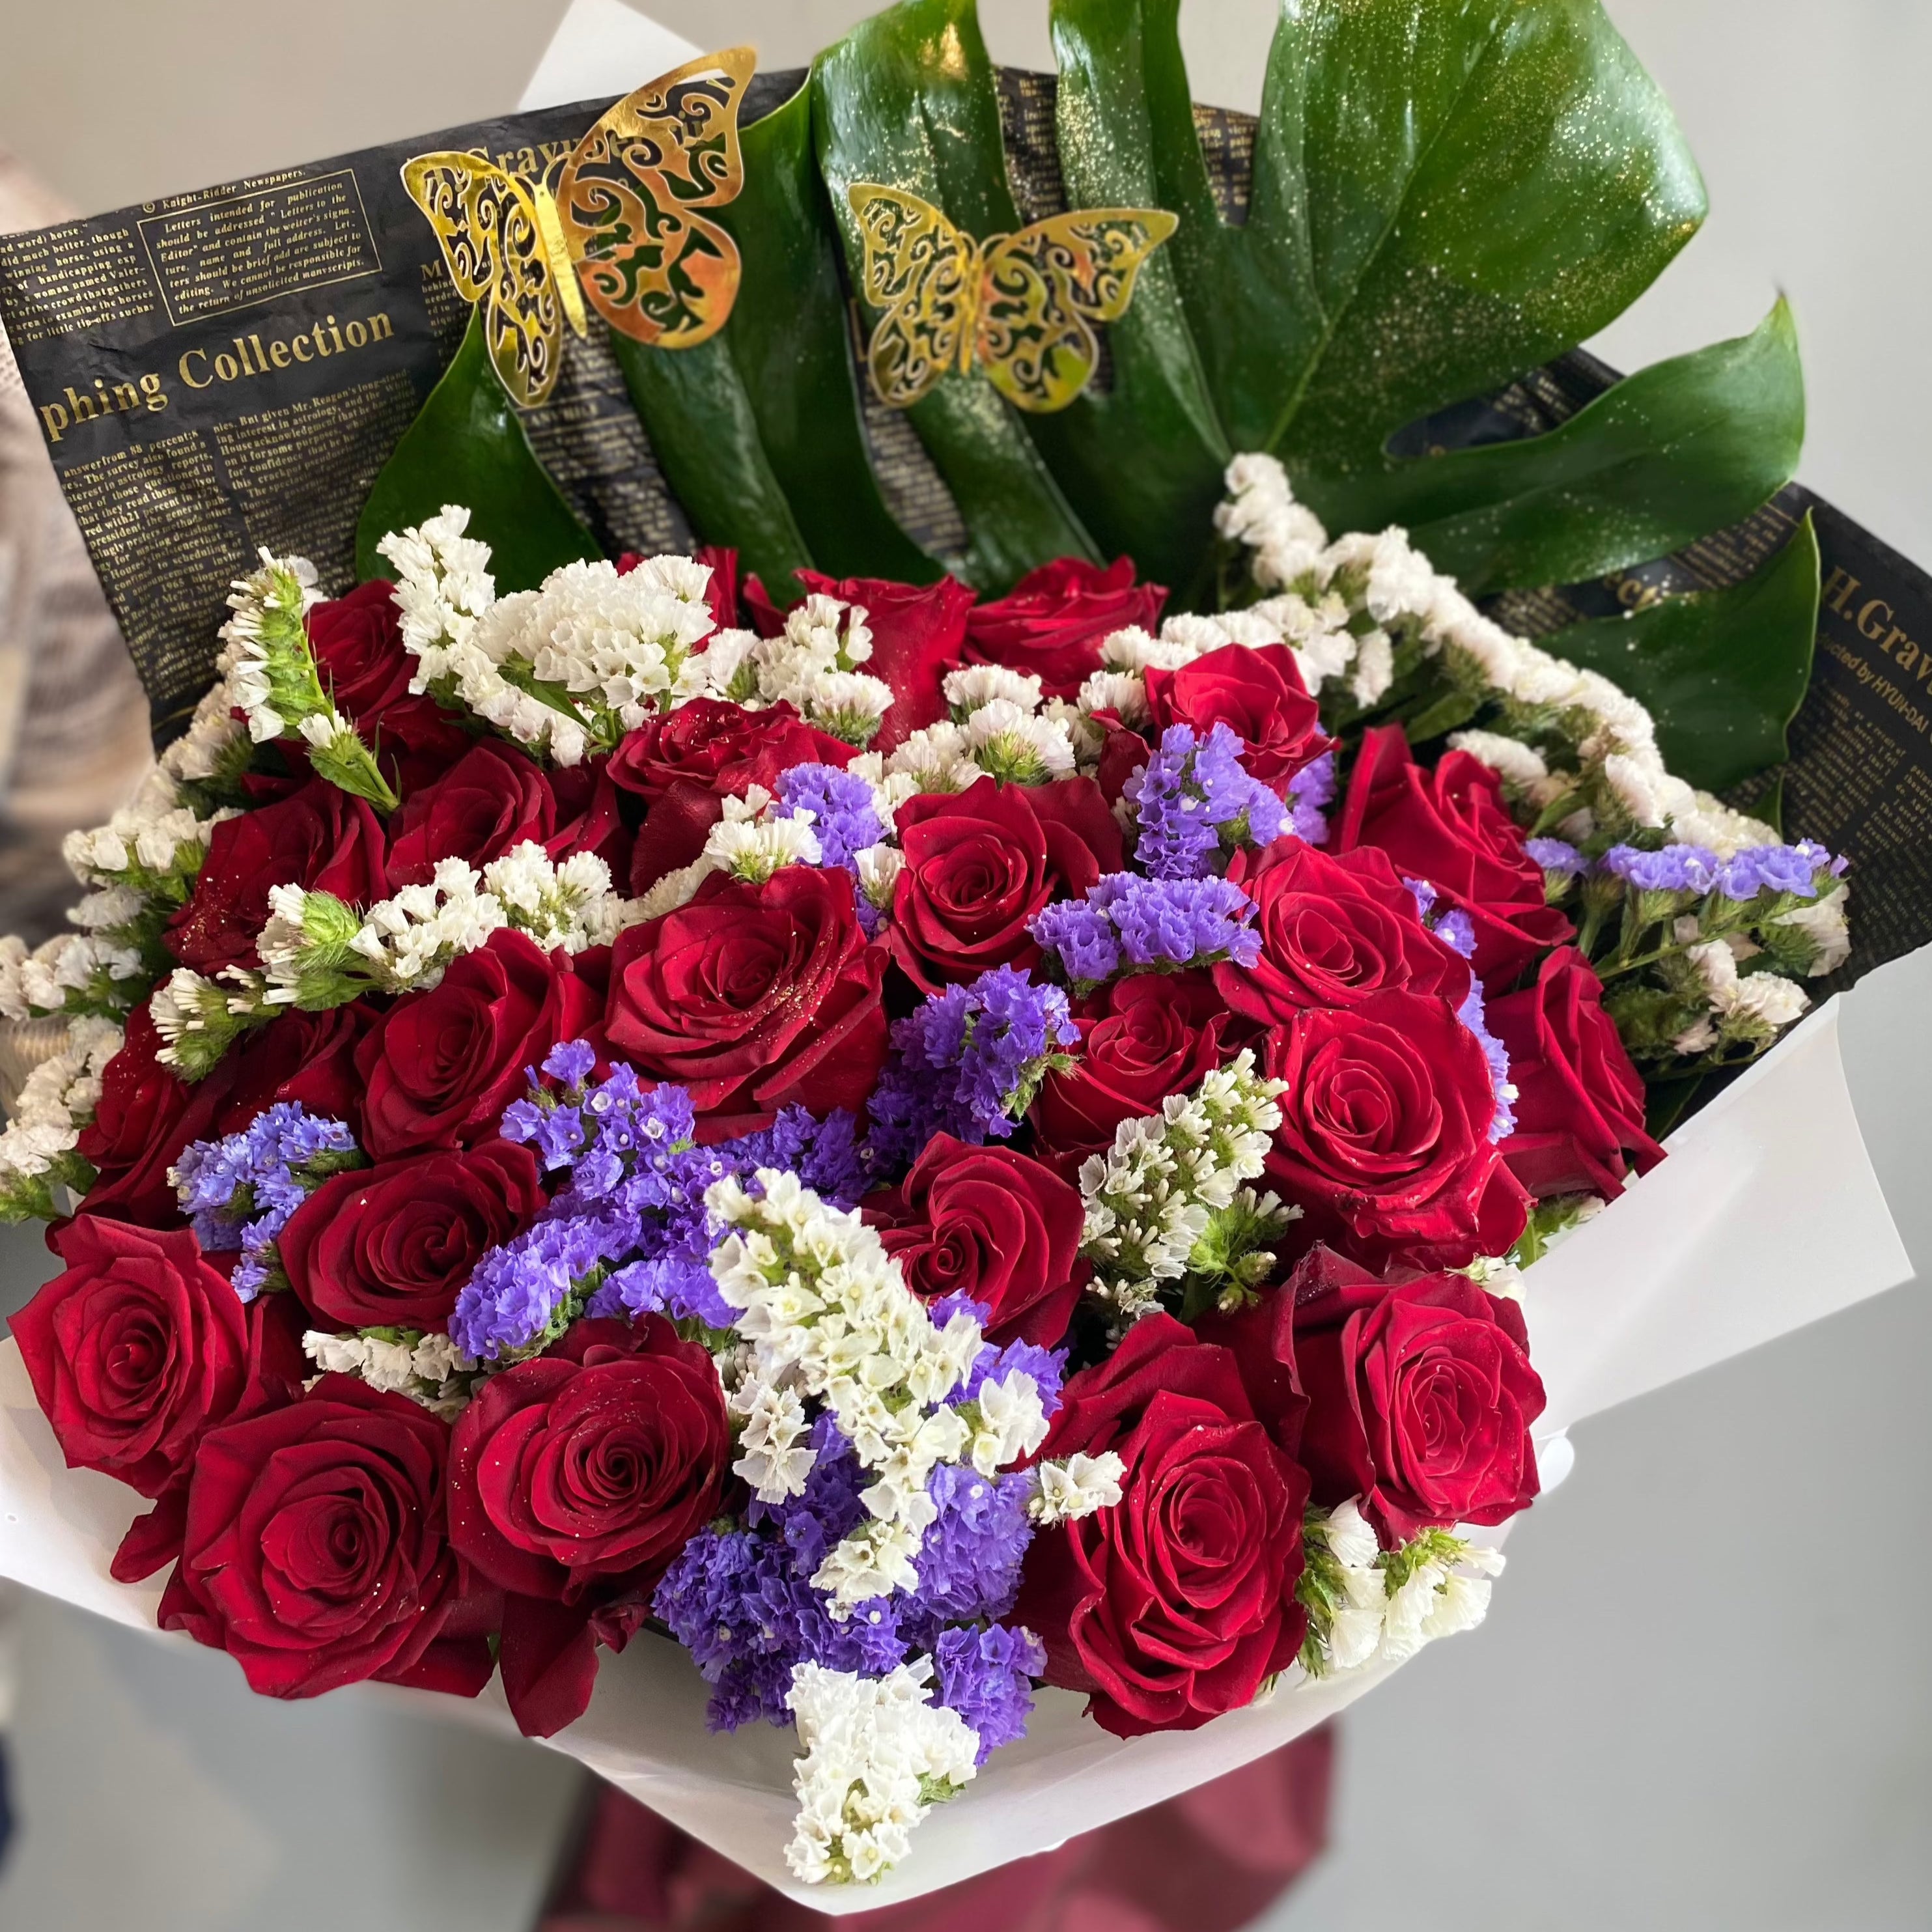 CLASSIC ROSES ARE RED BOX ARRANGEMENT - Red Roses And Million Stars